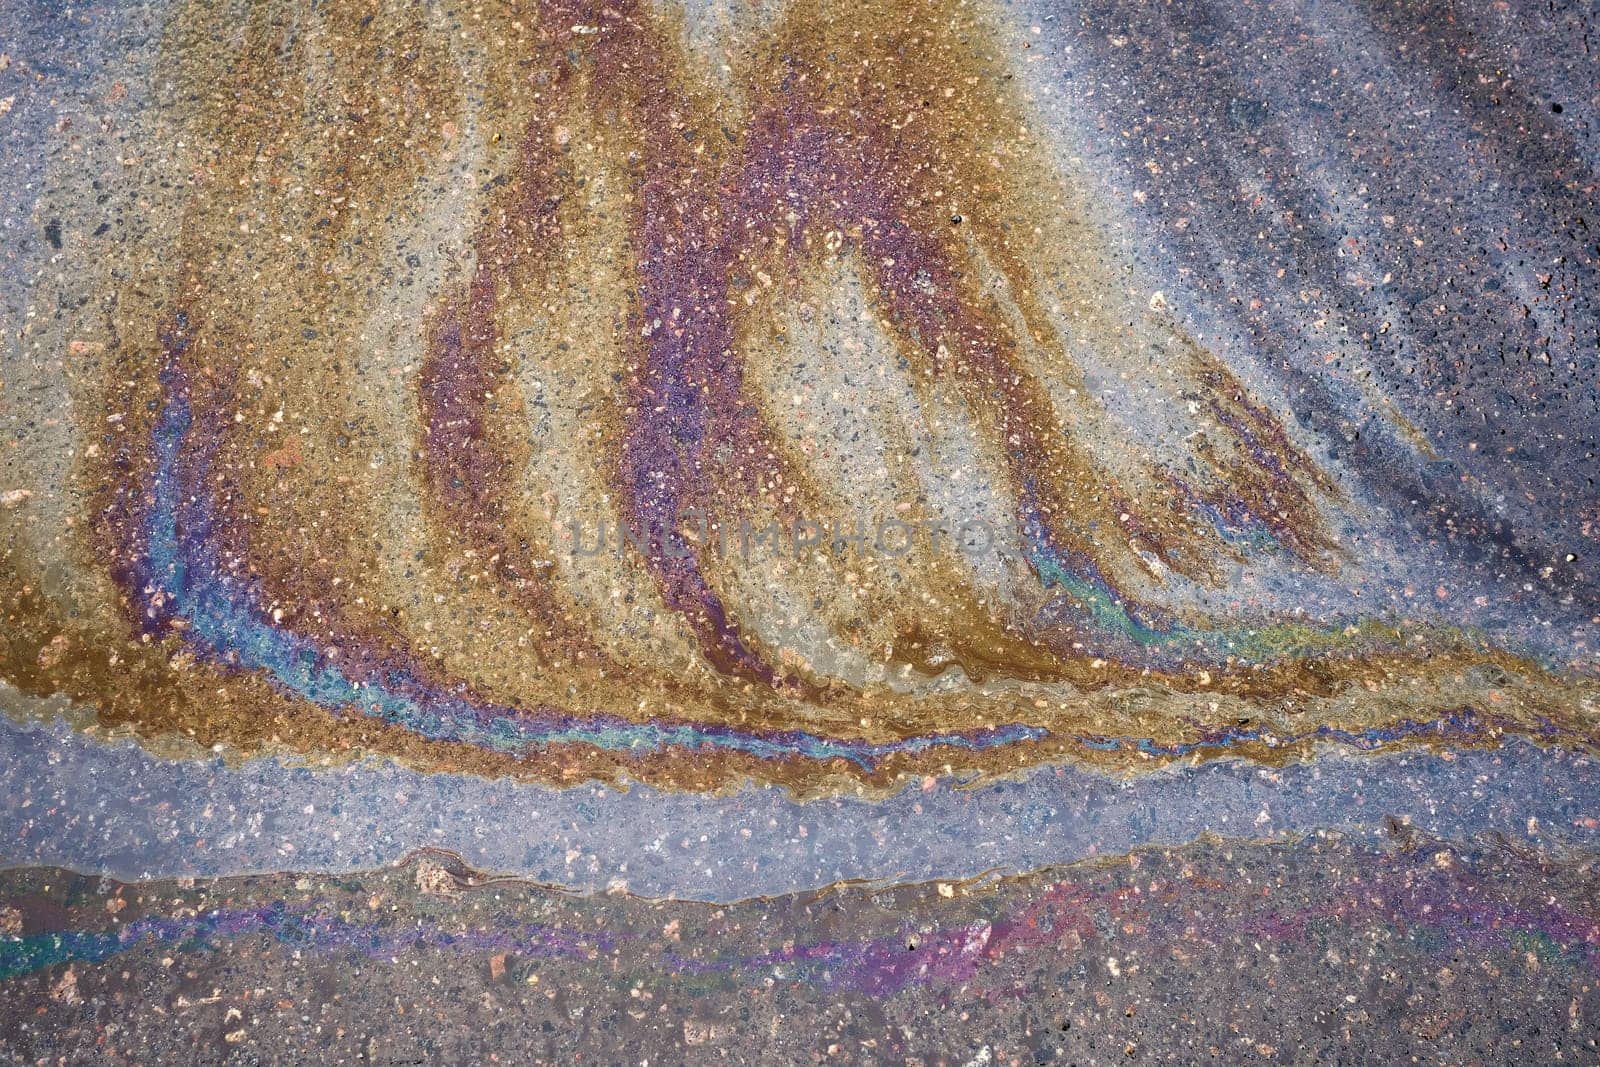 An oily iridescent stain of gasoline or oil spilled on the road